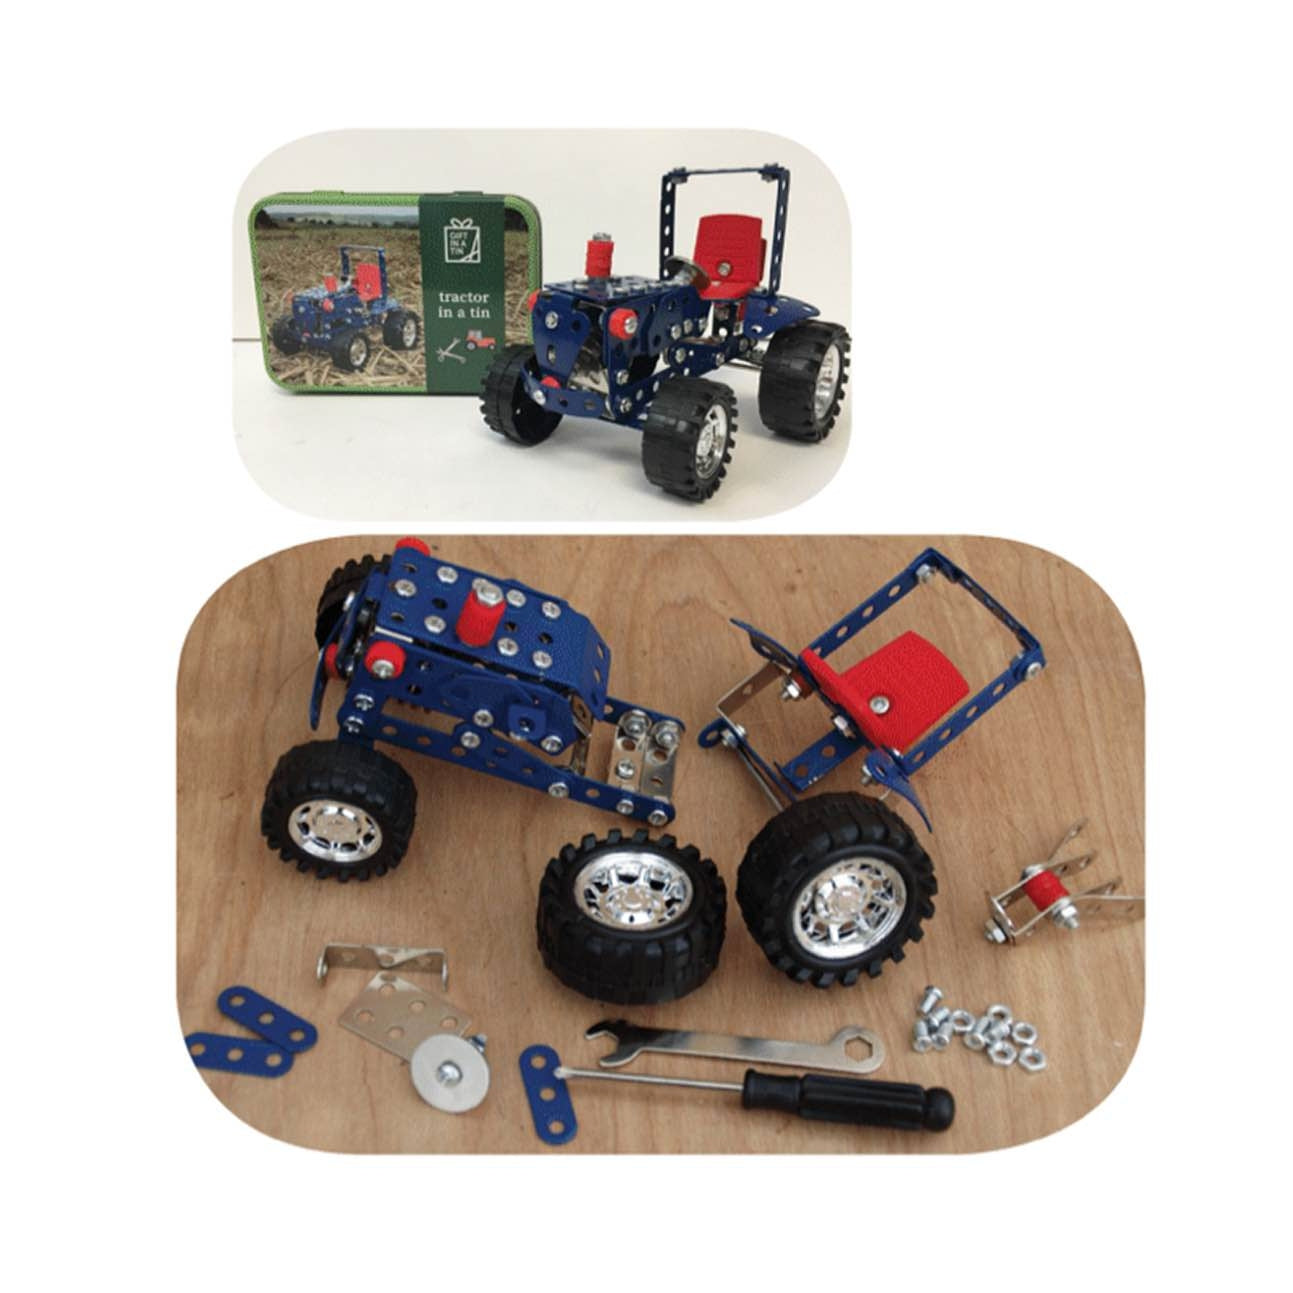 Build Your Own Tractor In A Tin